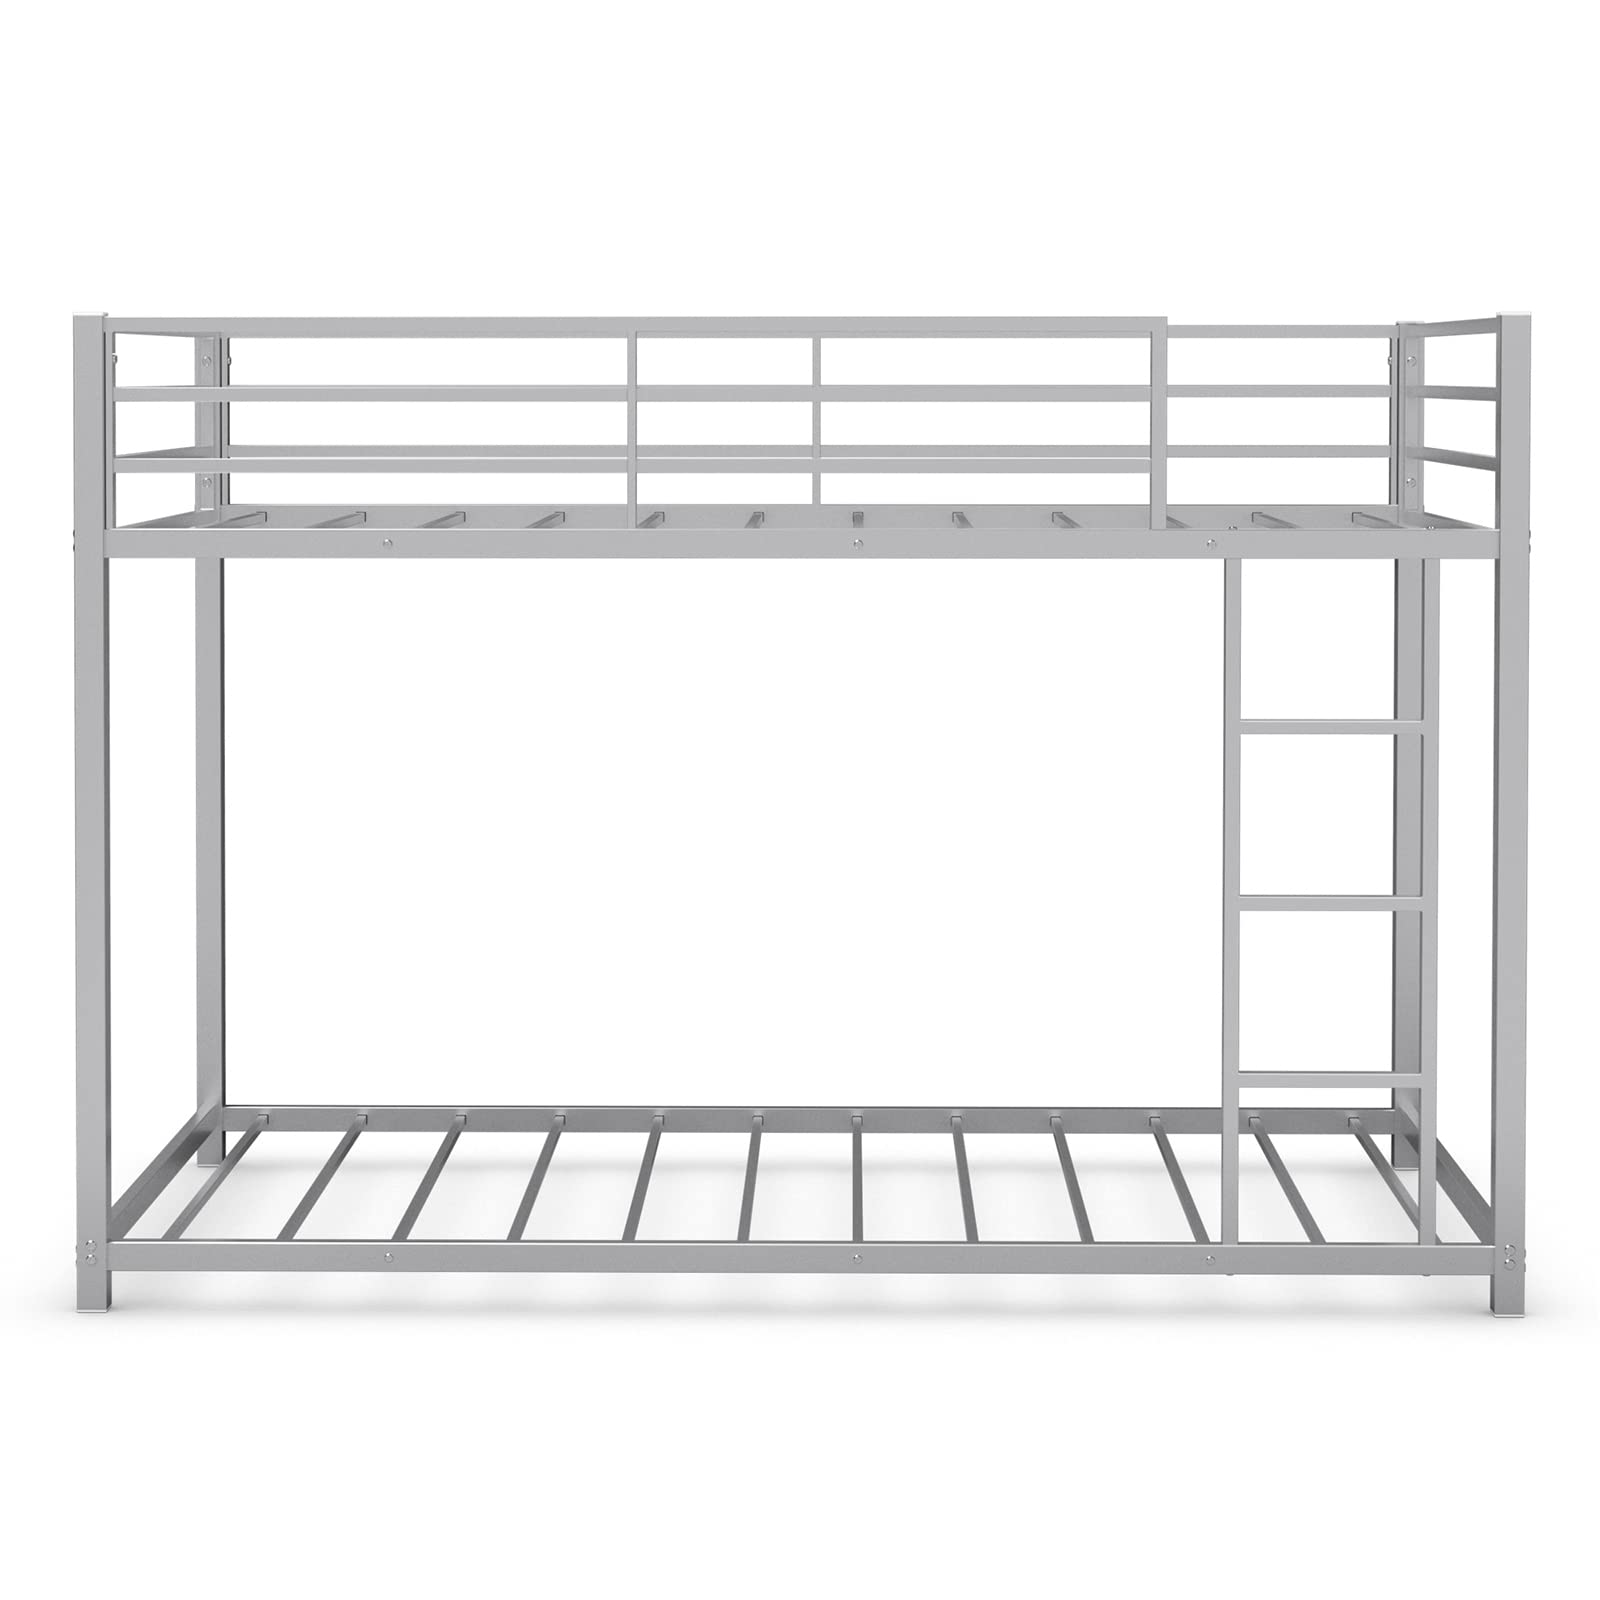 Giantex Metal Bunk Bed Twin Over Twin, Low Profile Bunk Bed Frame with Ladder & Full Length Guardrail